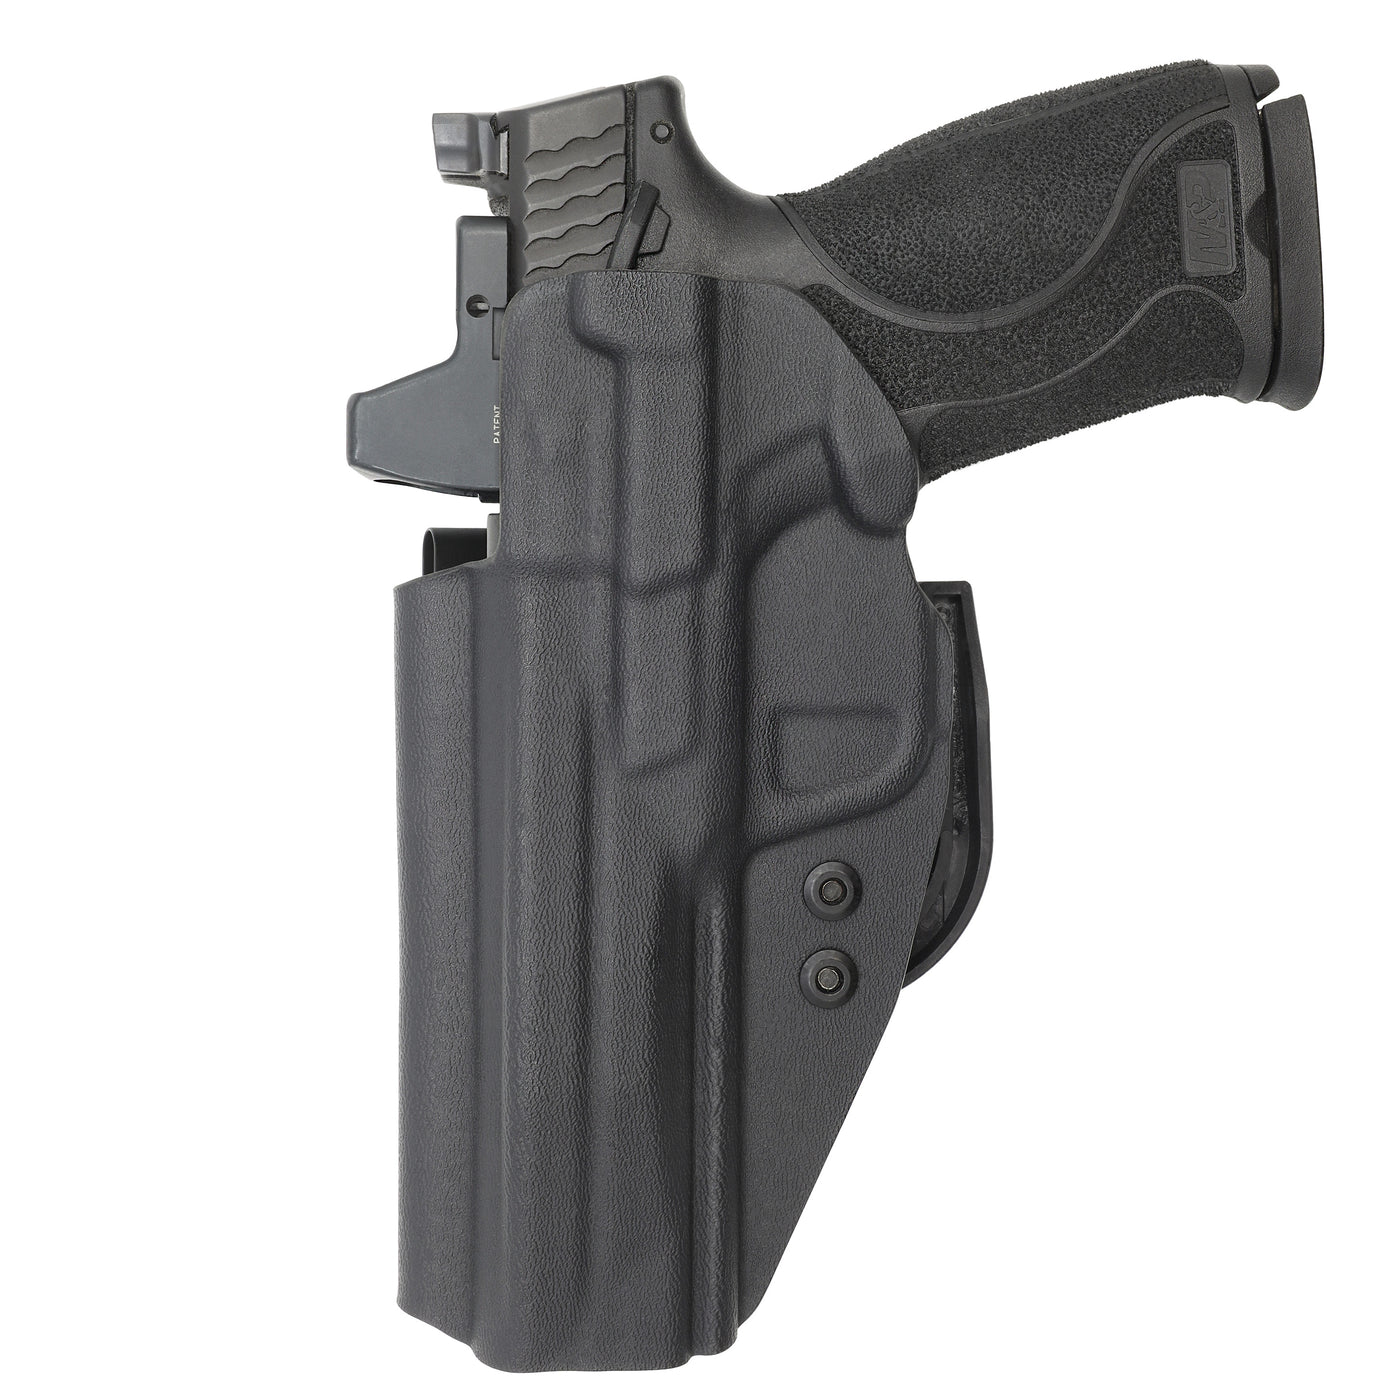 C&G Holsters quickship IWB ALPHA UPGRADE Covert M&P 10/45 5" in holstered position back view